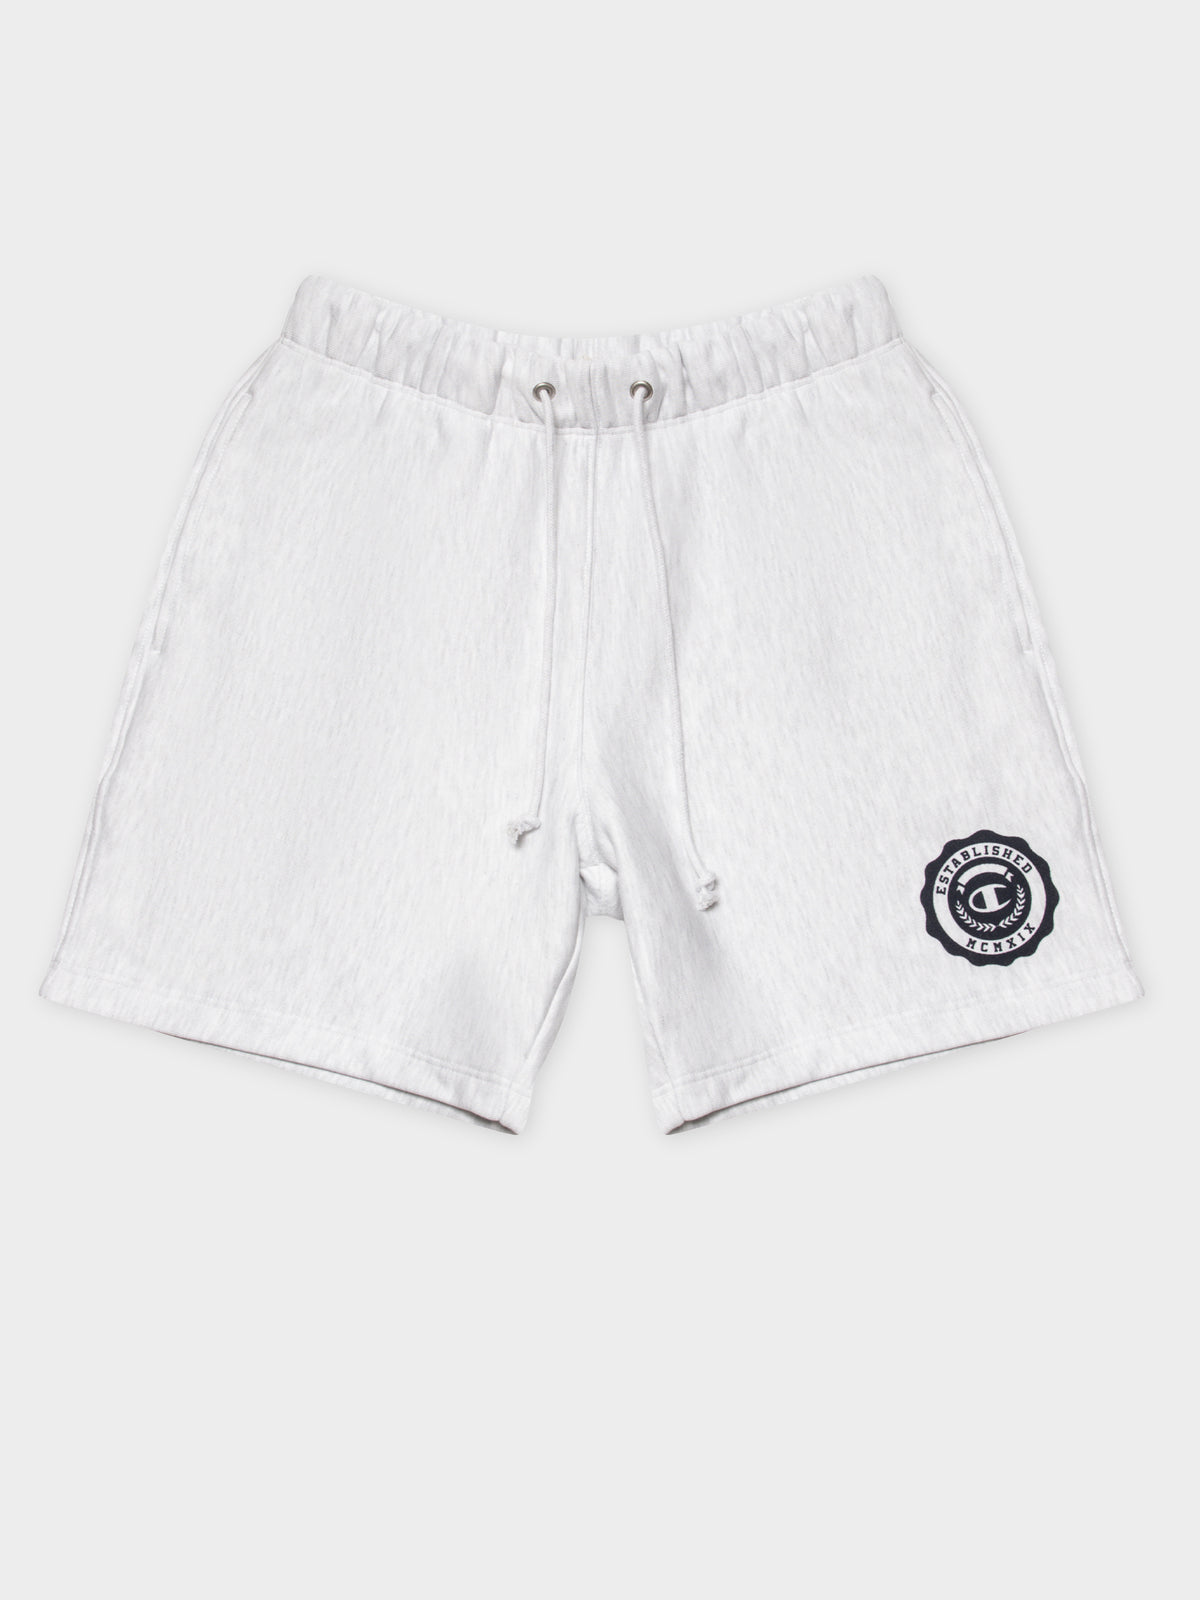 Reverse Weave Archive Shorts in Silver Grey